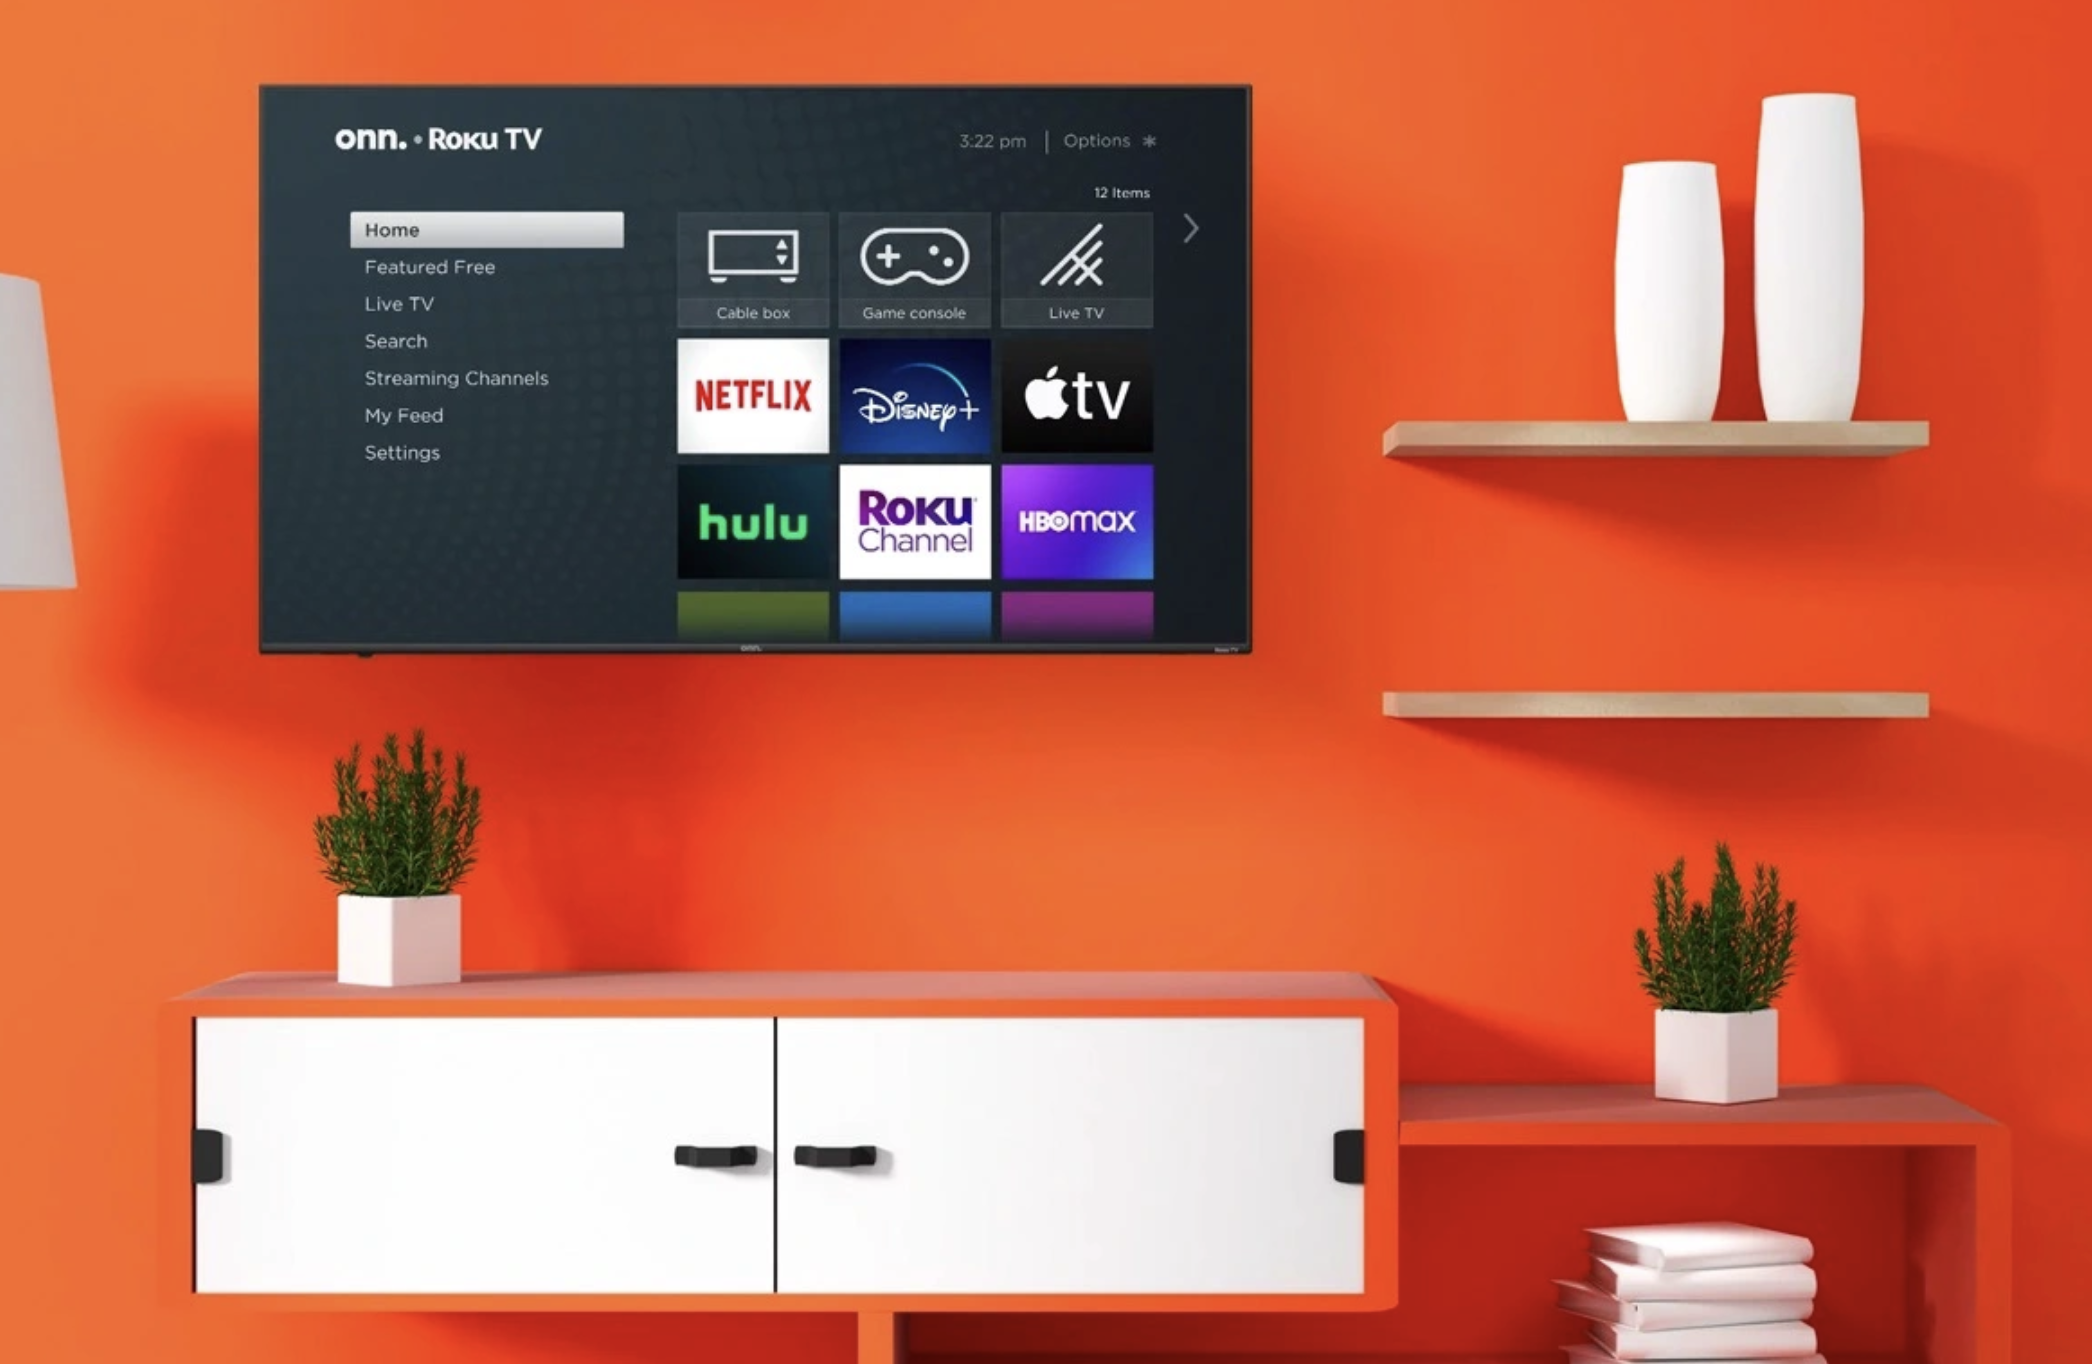 The onn. 70-inch 4K Roku TV hangs on the wall as part of a home theater arrangement.